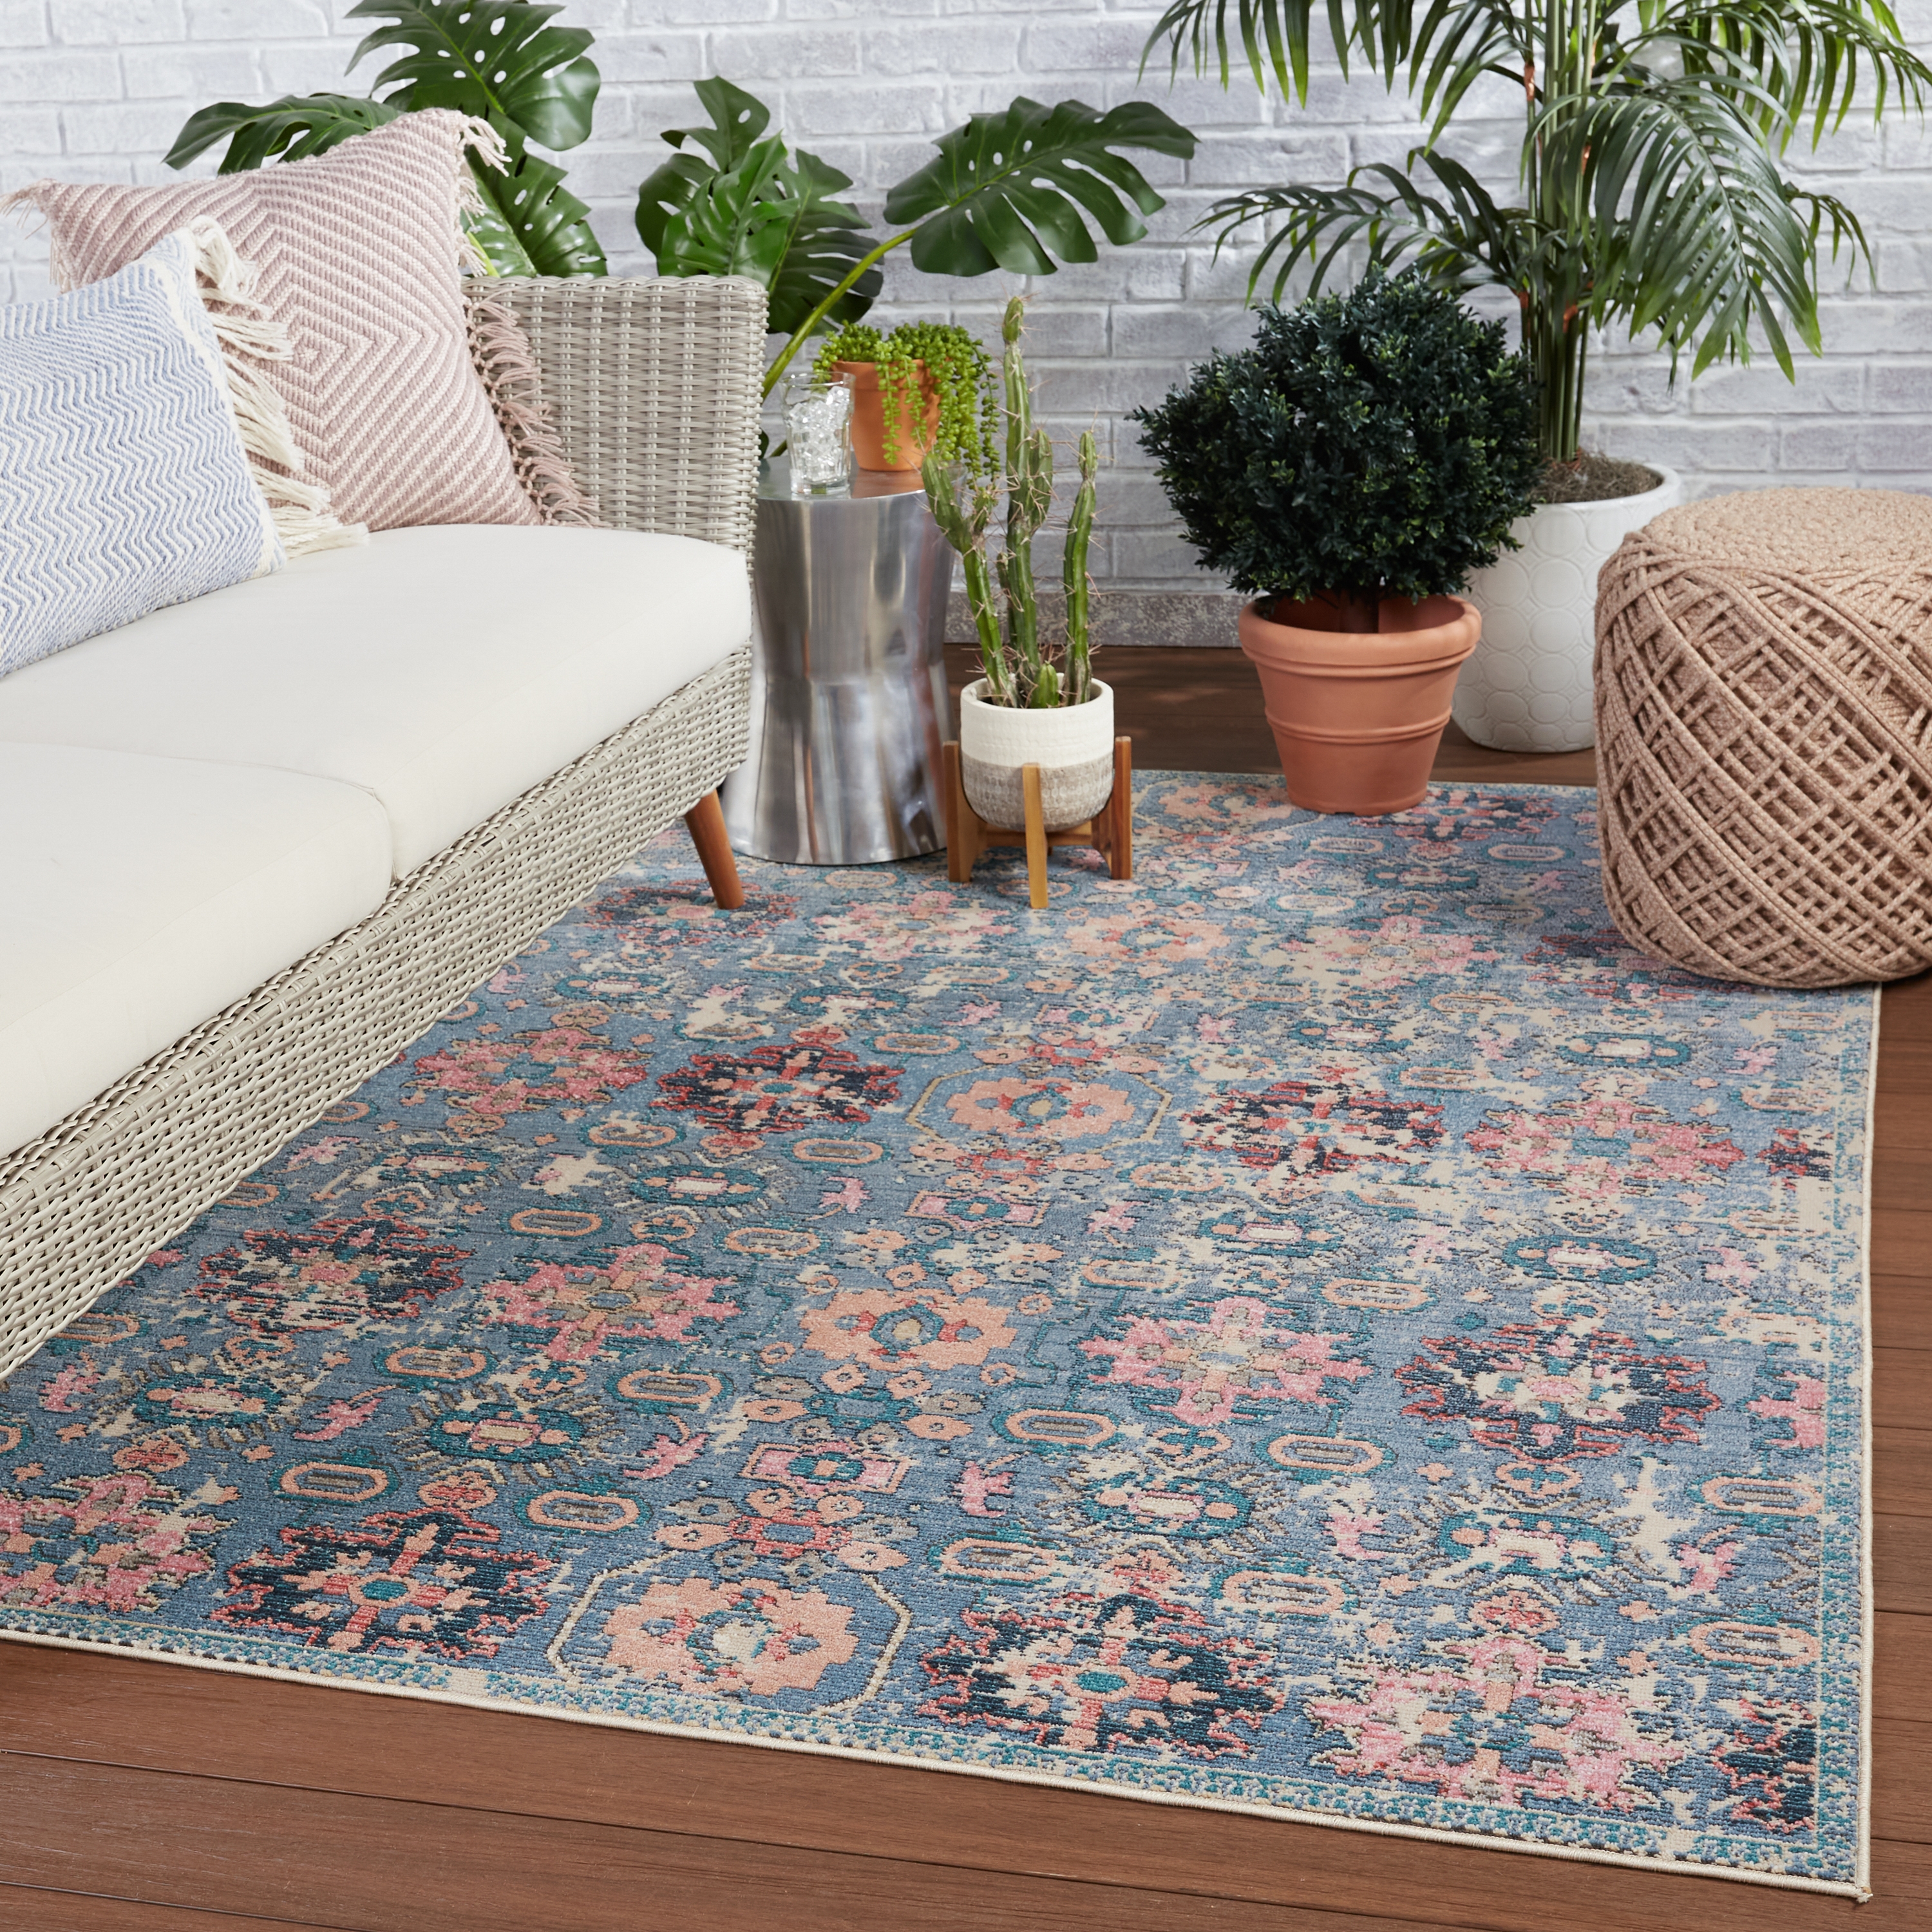 Vibe by Farella Indoor/ Outdoor Oriental Blue/ Pink Runner Rug (2'6"X8') - Image 5